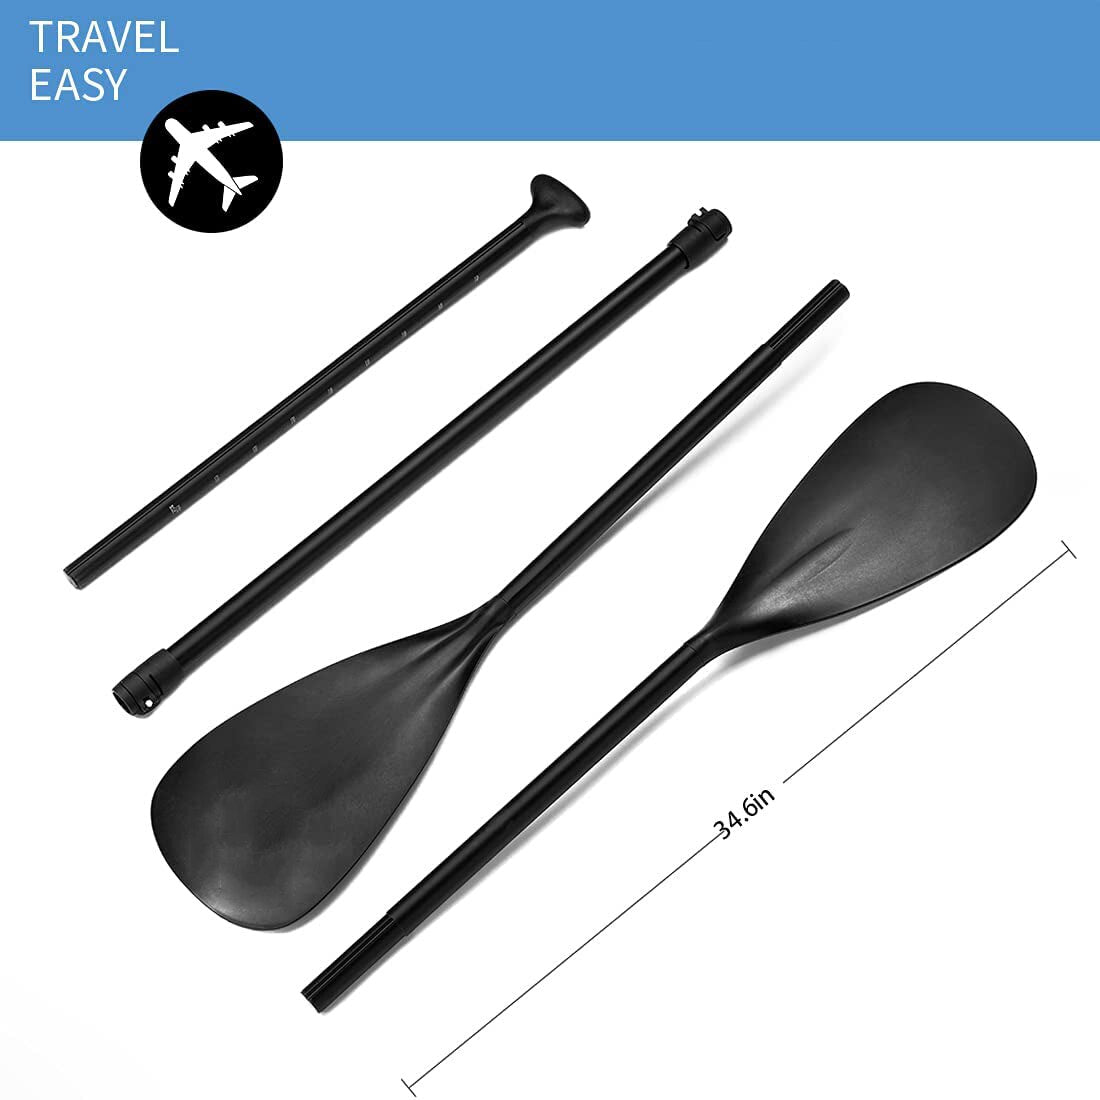 Adjustable 3-Piece Stand-Up Board Paddles of Aluminum Alloy